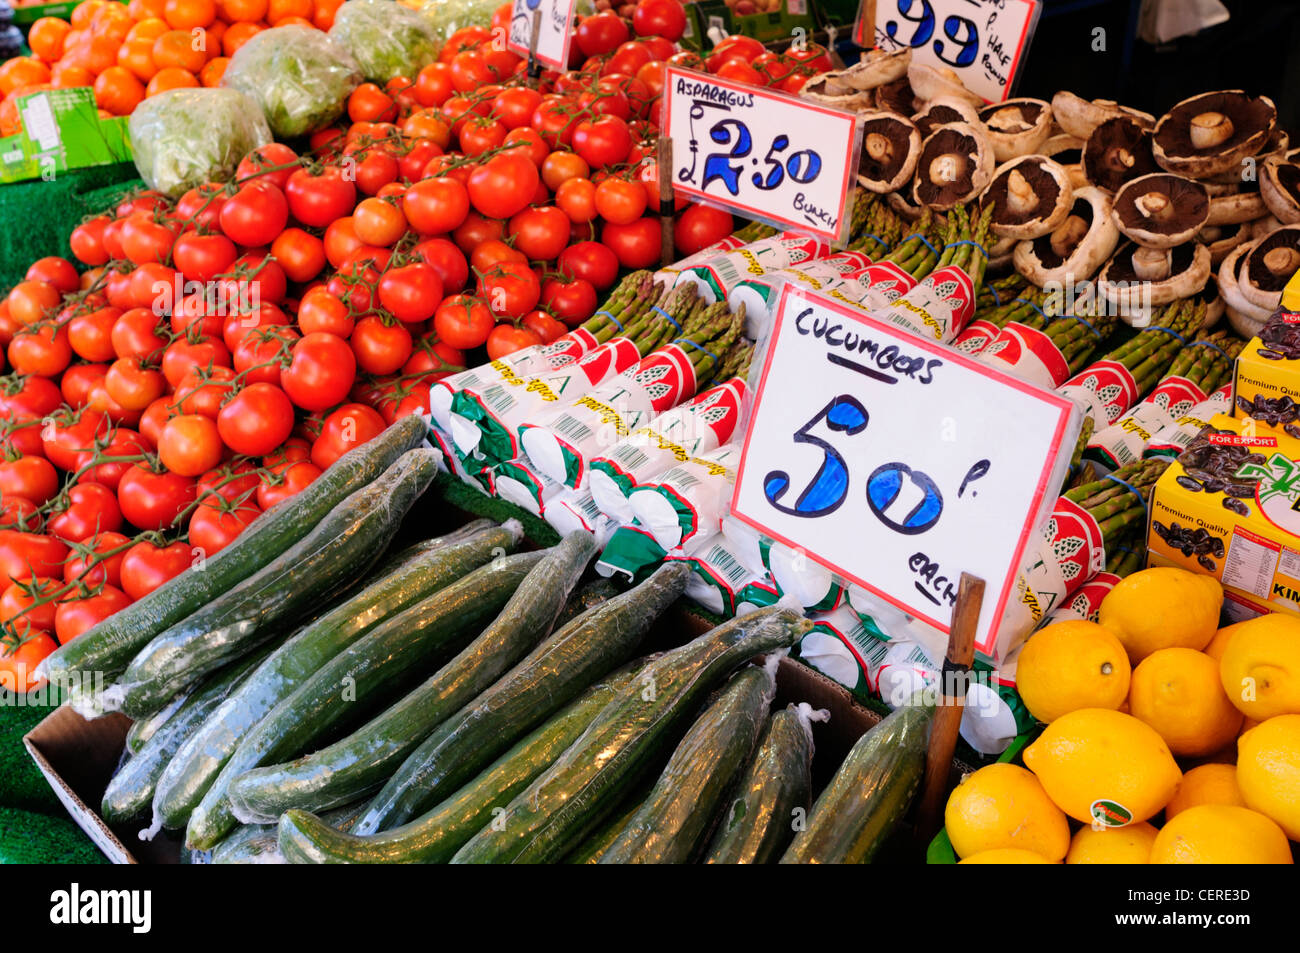 Fresh fruit and vegetables for sale from a market stall. Stock Photo